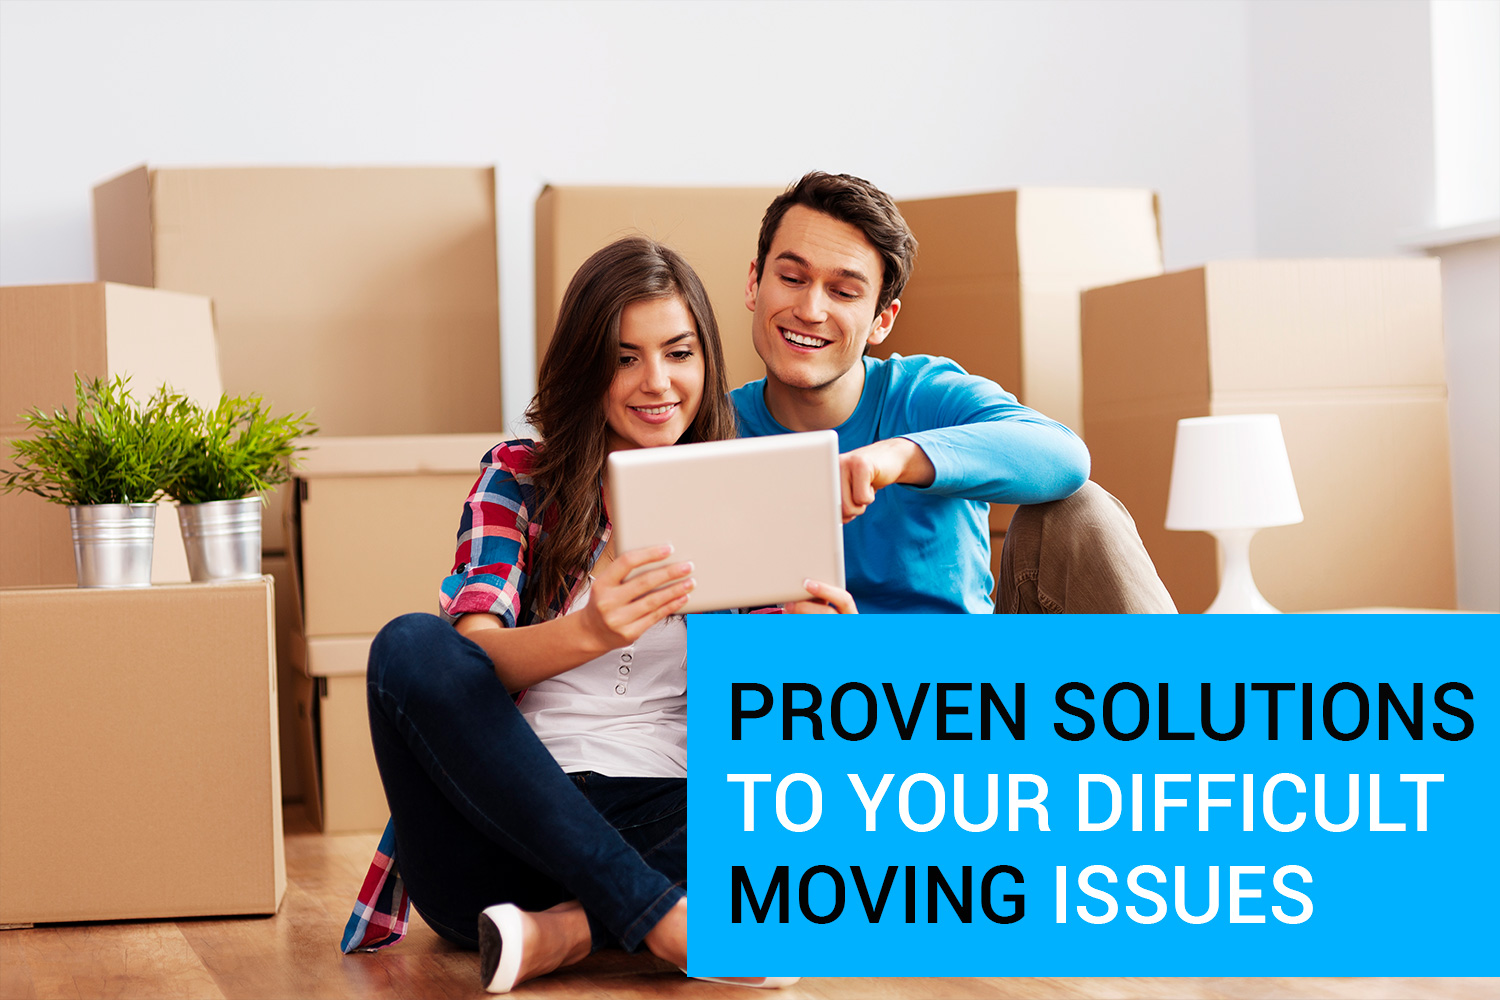 Proven Solutions to Your Difficult Moving Issues